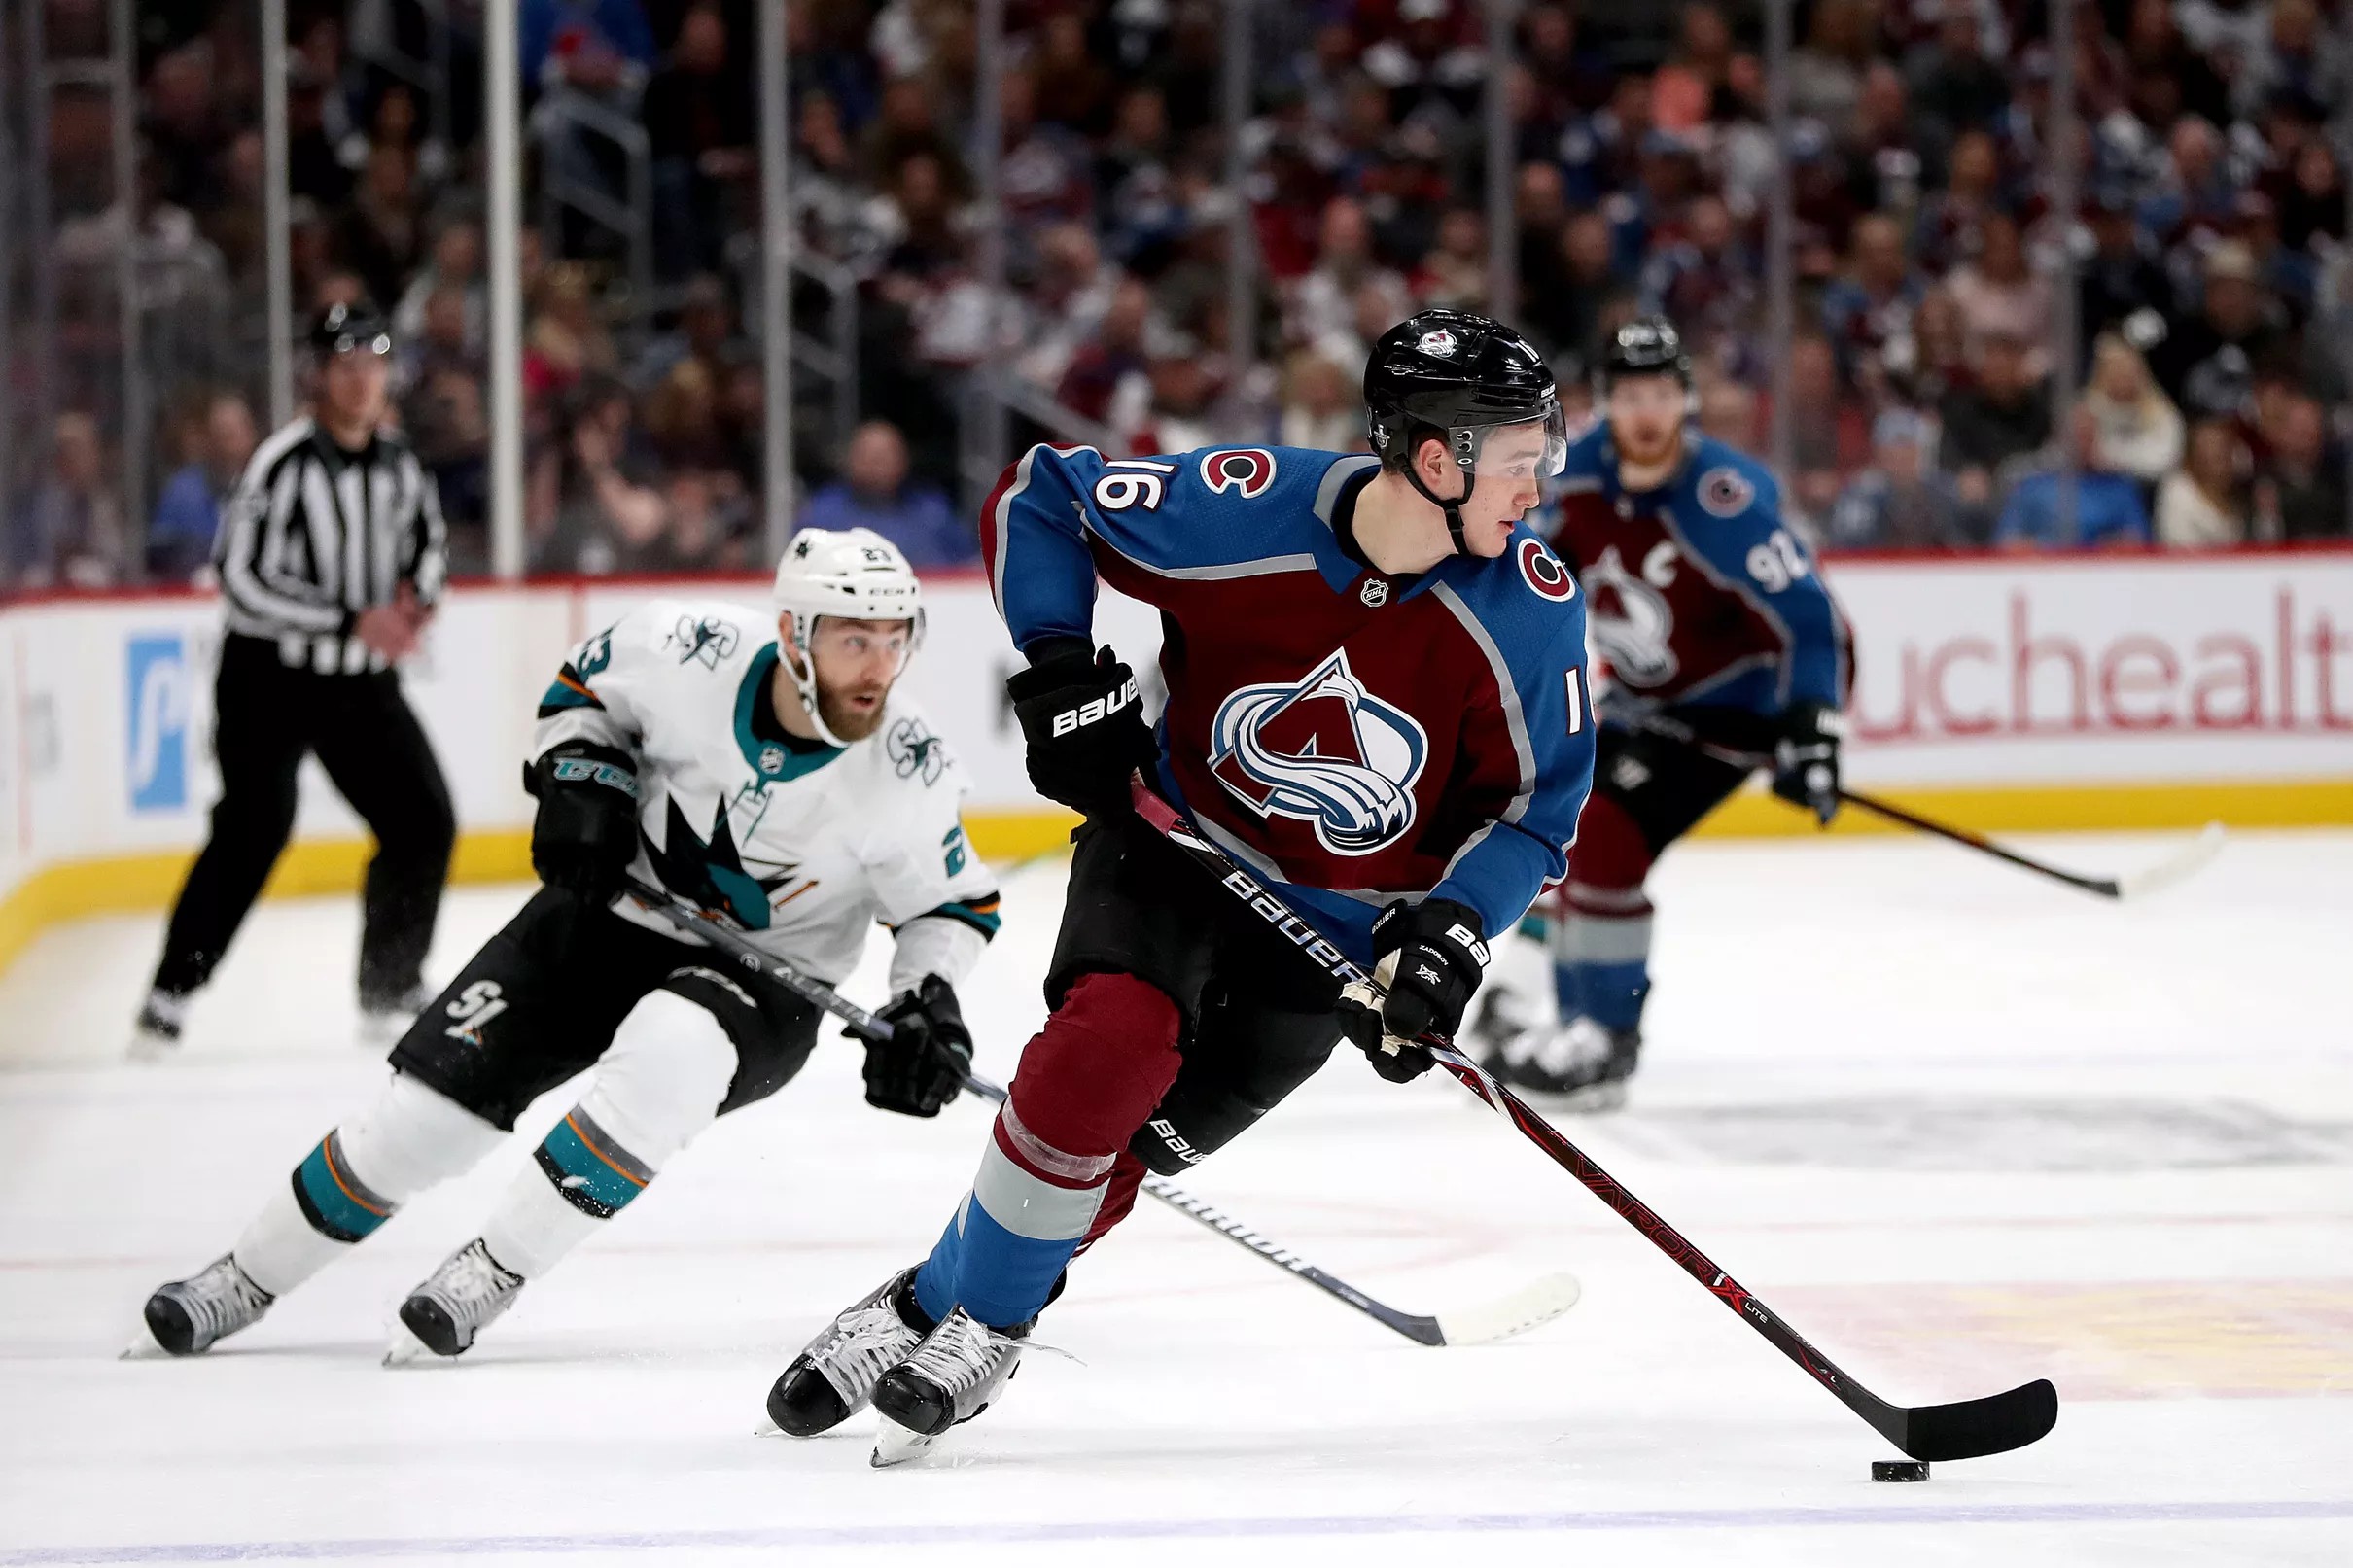 Colorado Avalanche Playoff Game Day A Chance to Even the Series on